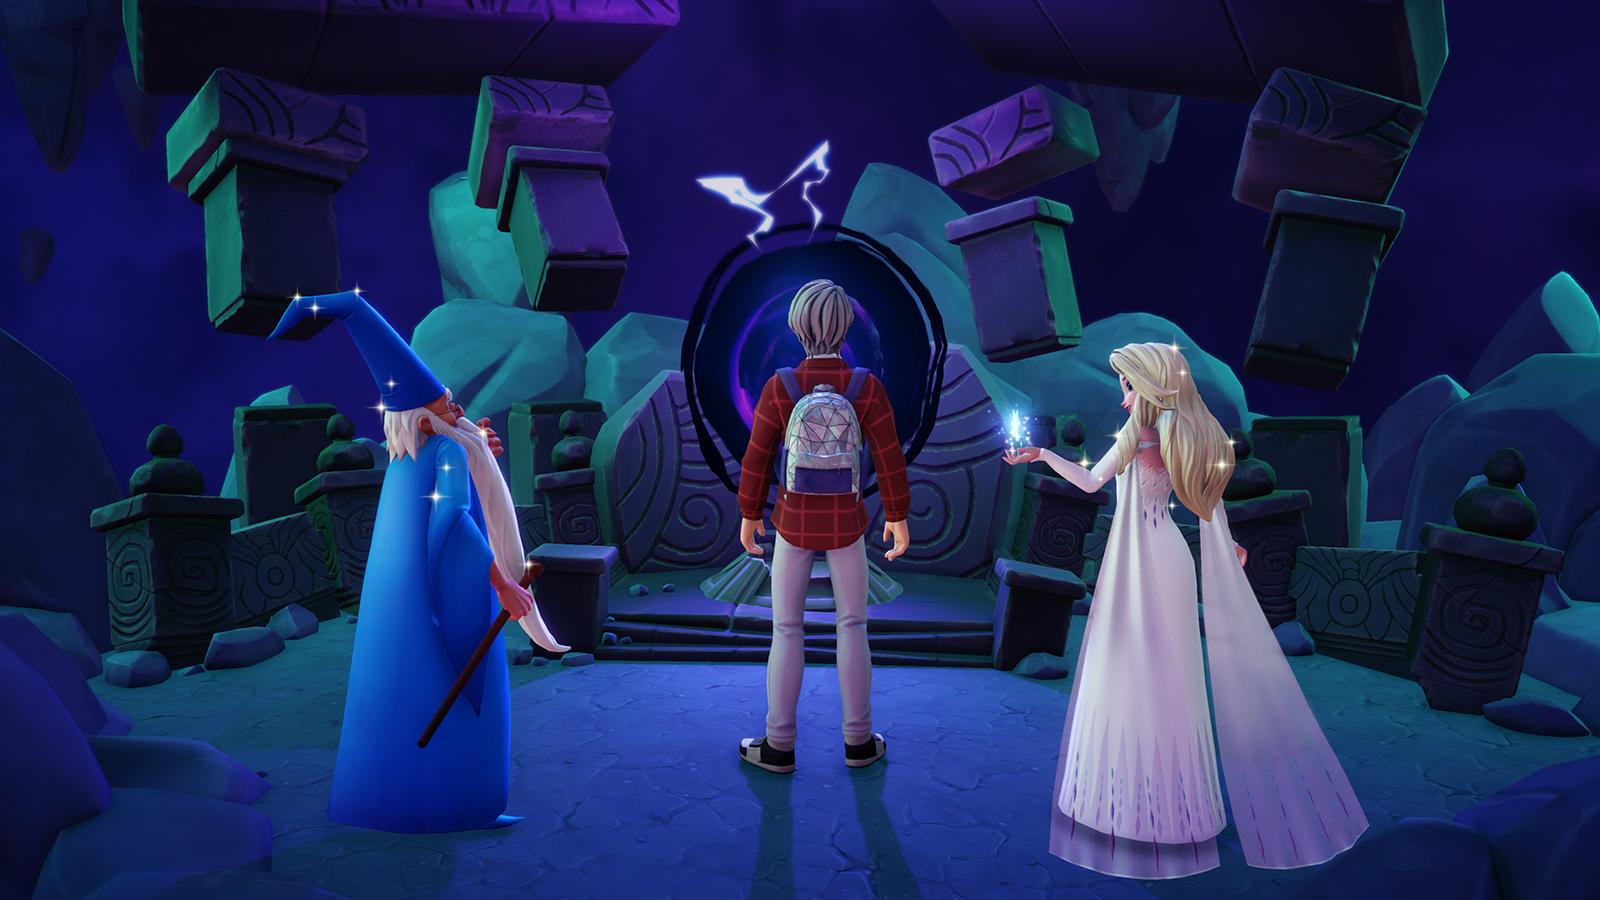 Player with Merlin and Elsa